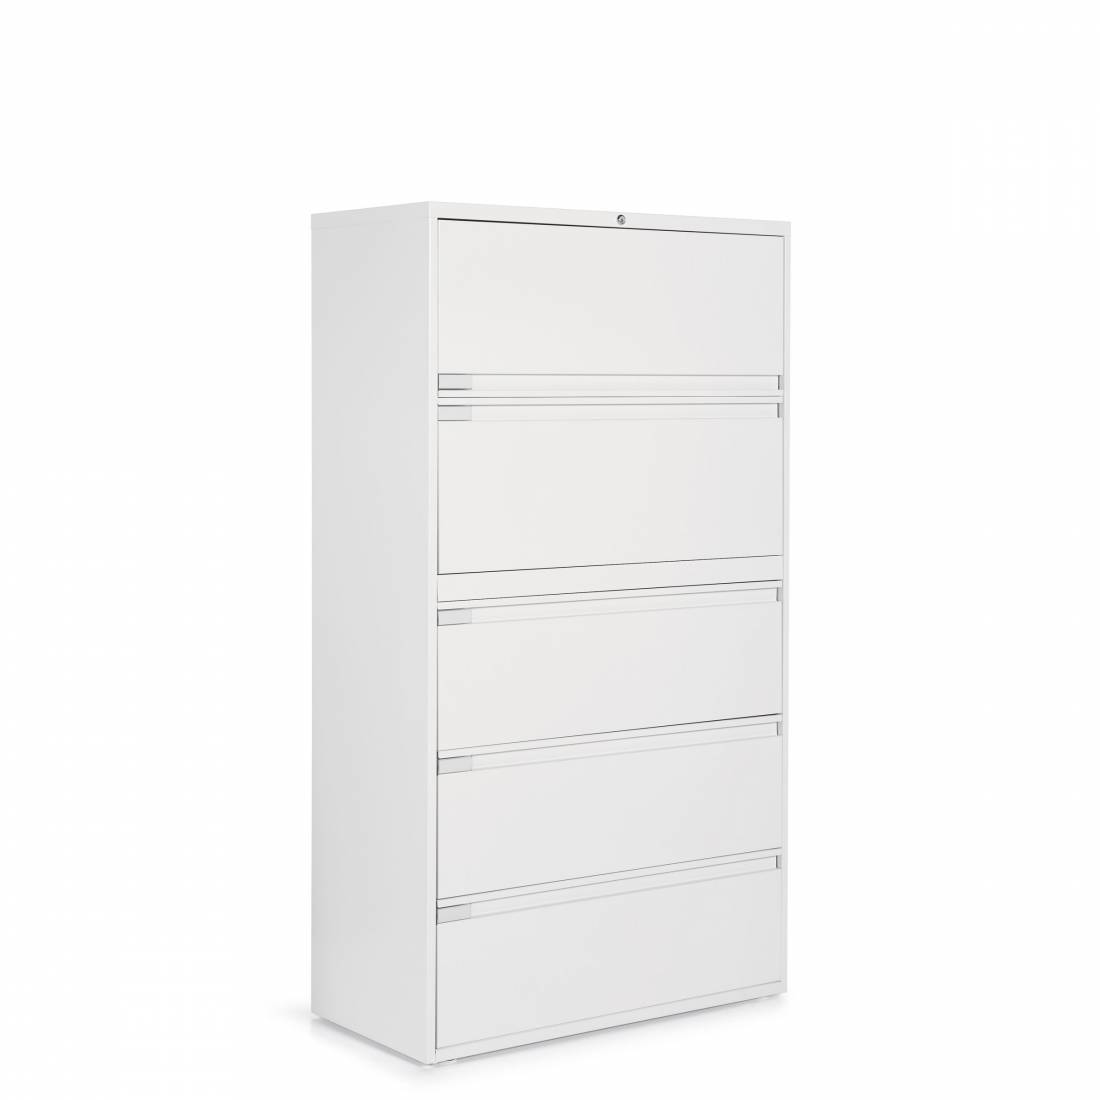 36”W 5 Drawer Lateral File